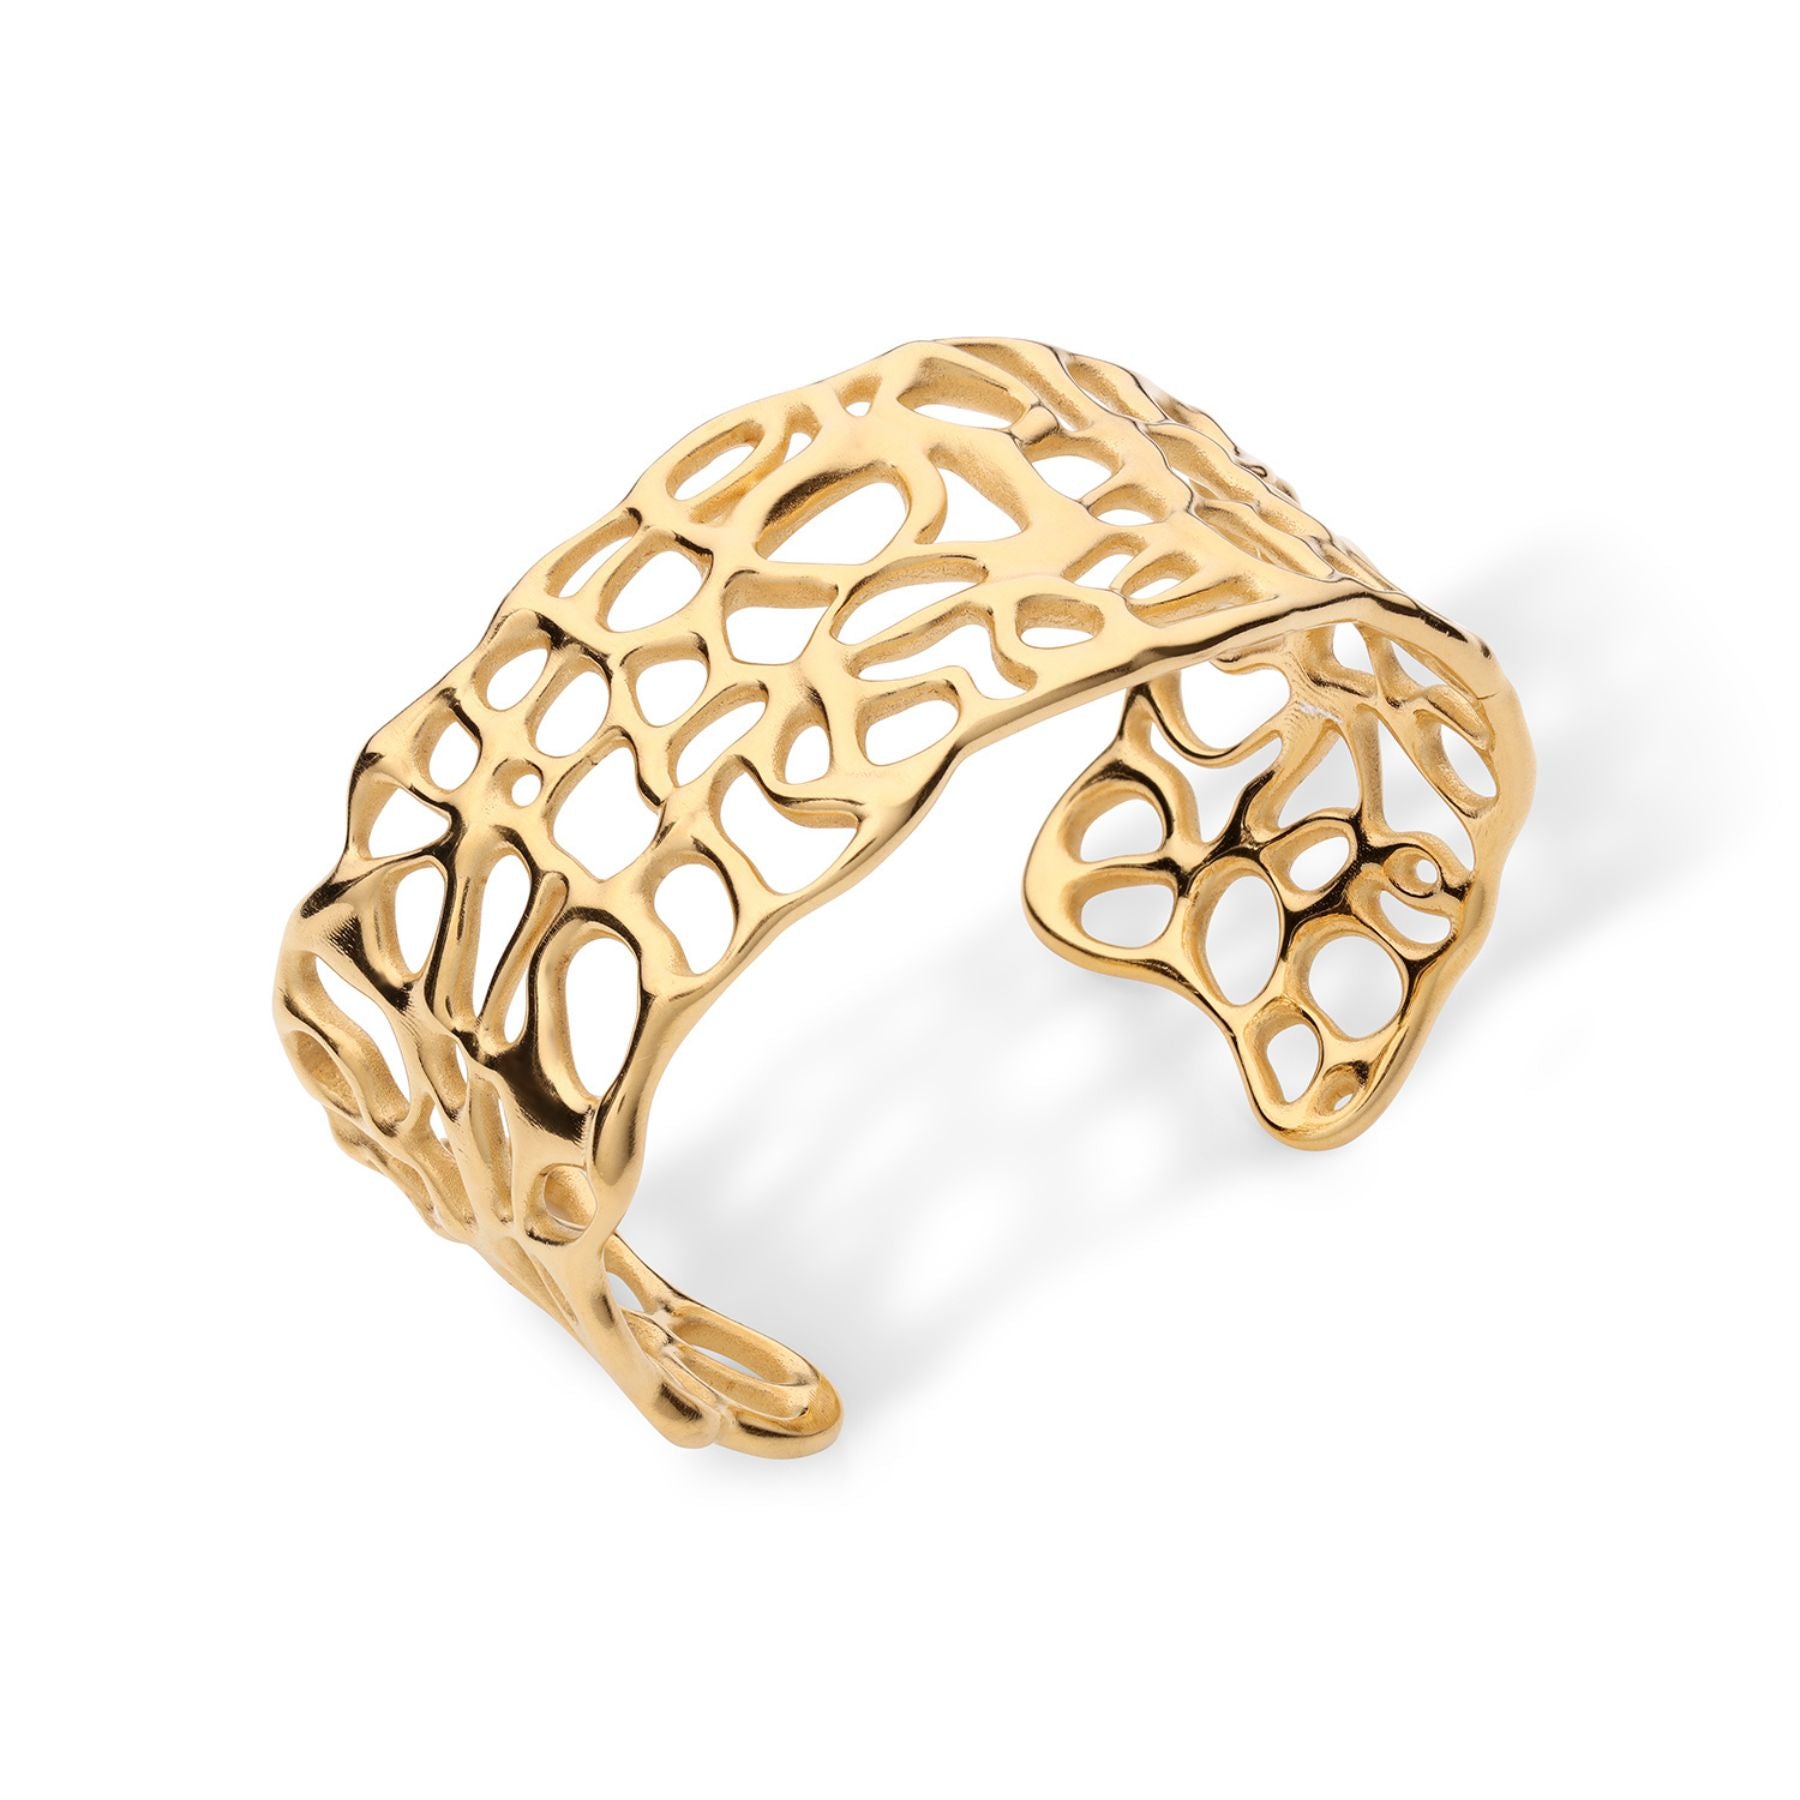 Abstract cuff bracelet in 18k yellow gold.